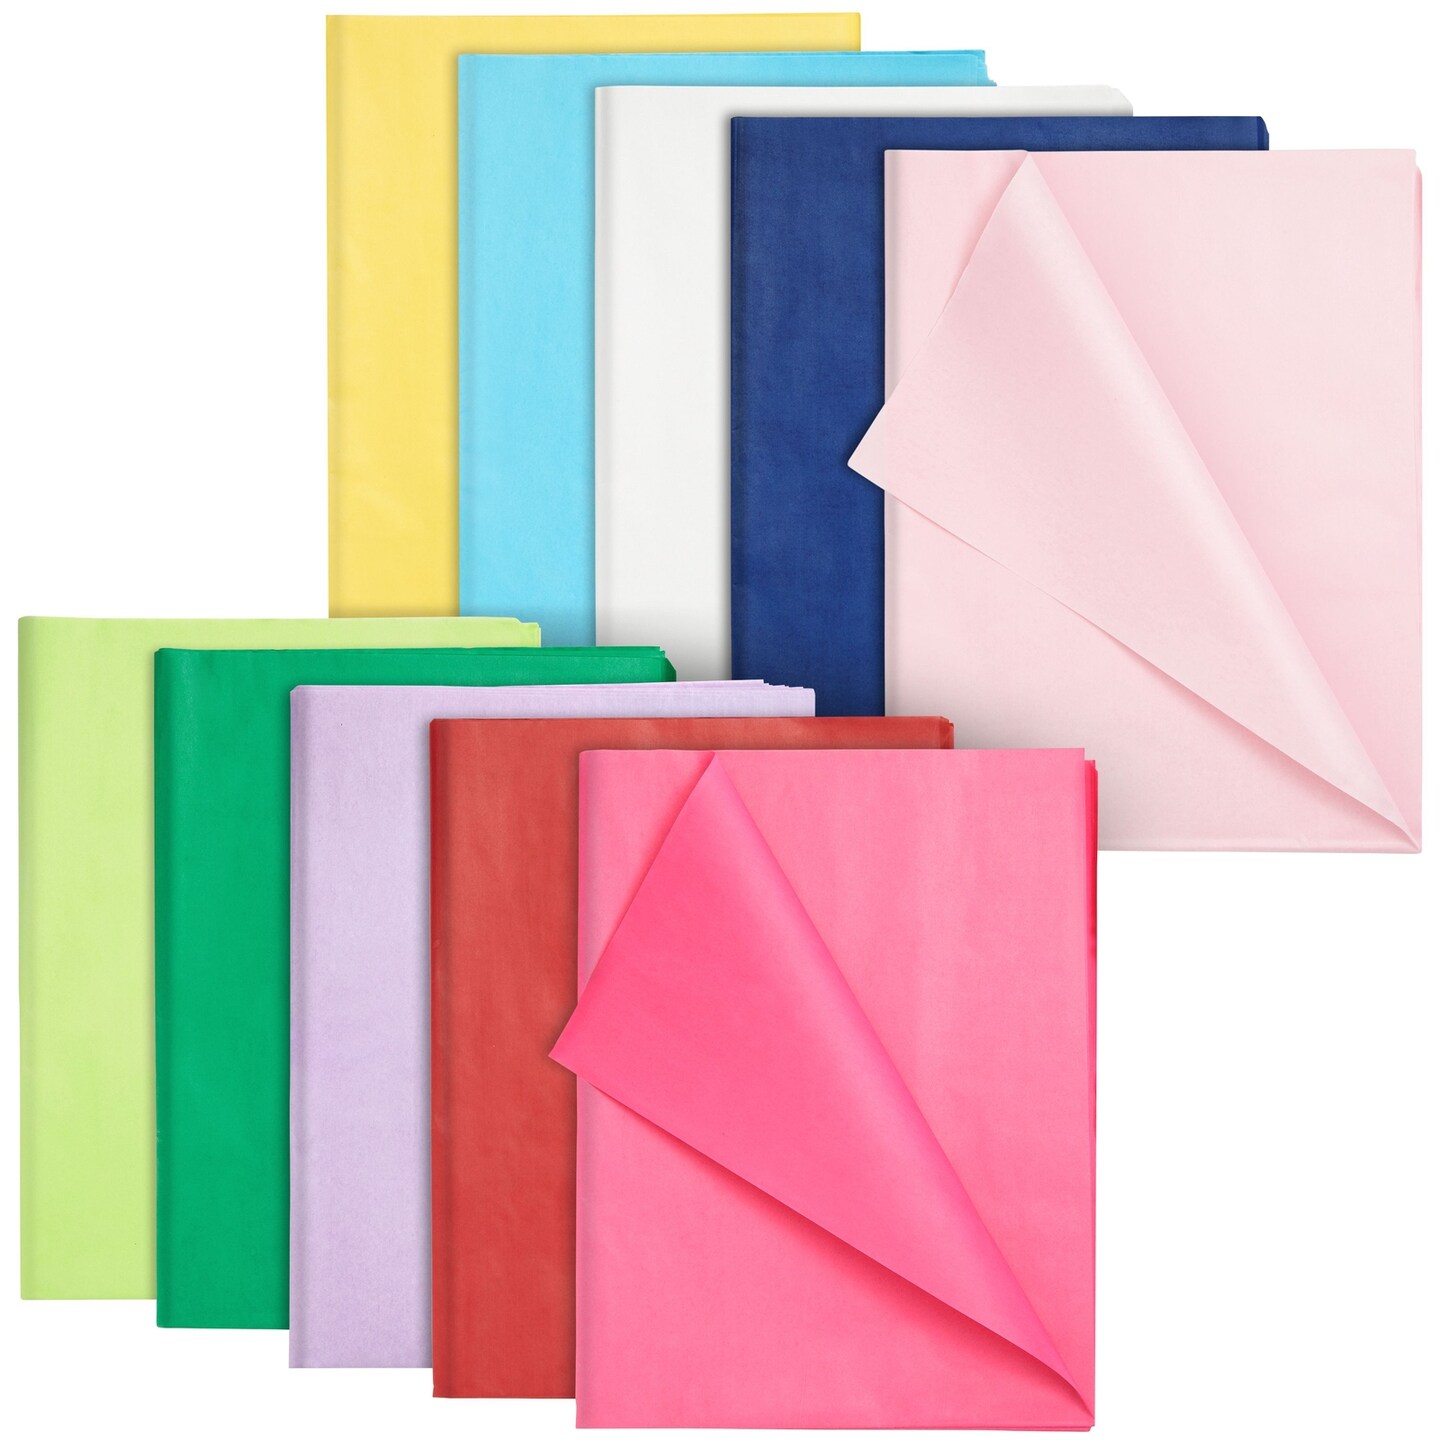 120 Sheets Tissue Paper for Gift Bags, Gift Wrapping, Crafts - Colorful  Tissue Paper for Packaging, Presents, Gift Wrapping Supplies (10 Colors,  26x20